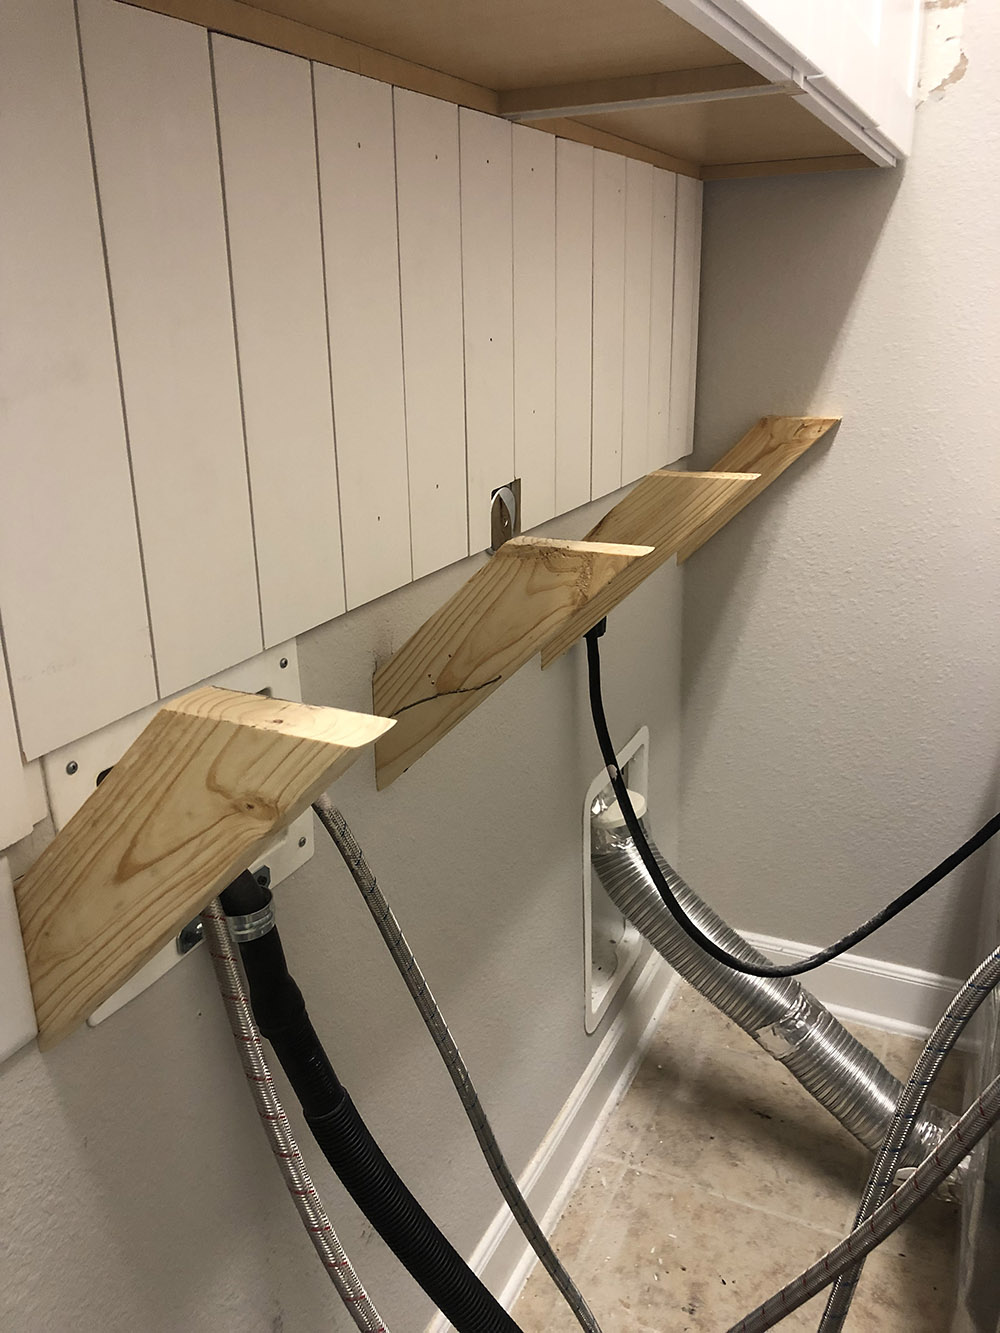 A laundry room wall with four angled wood supports sticking out.